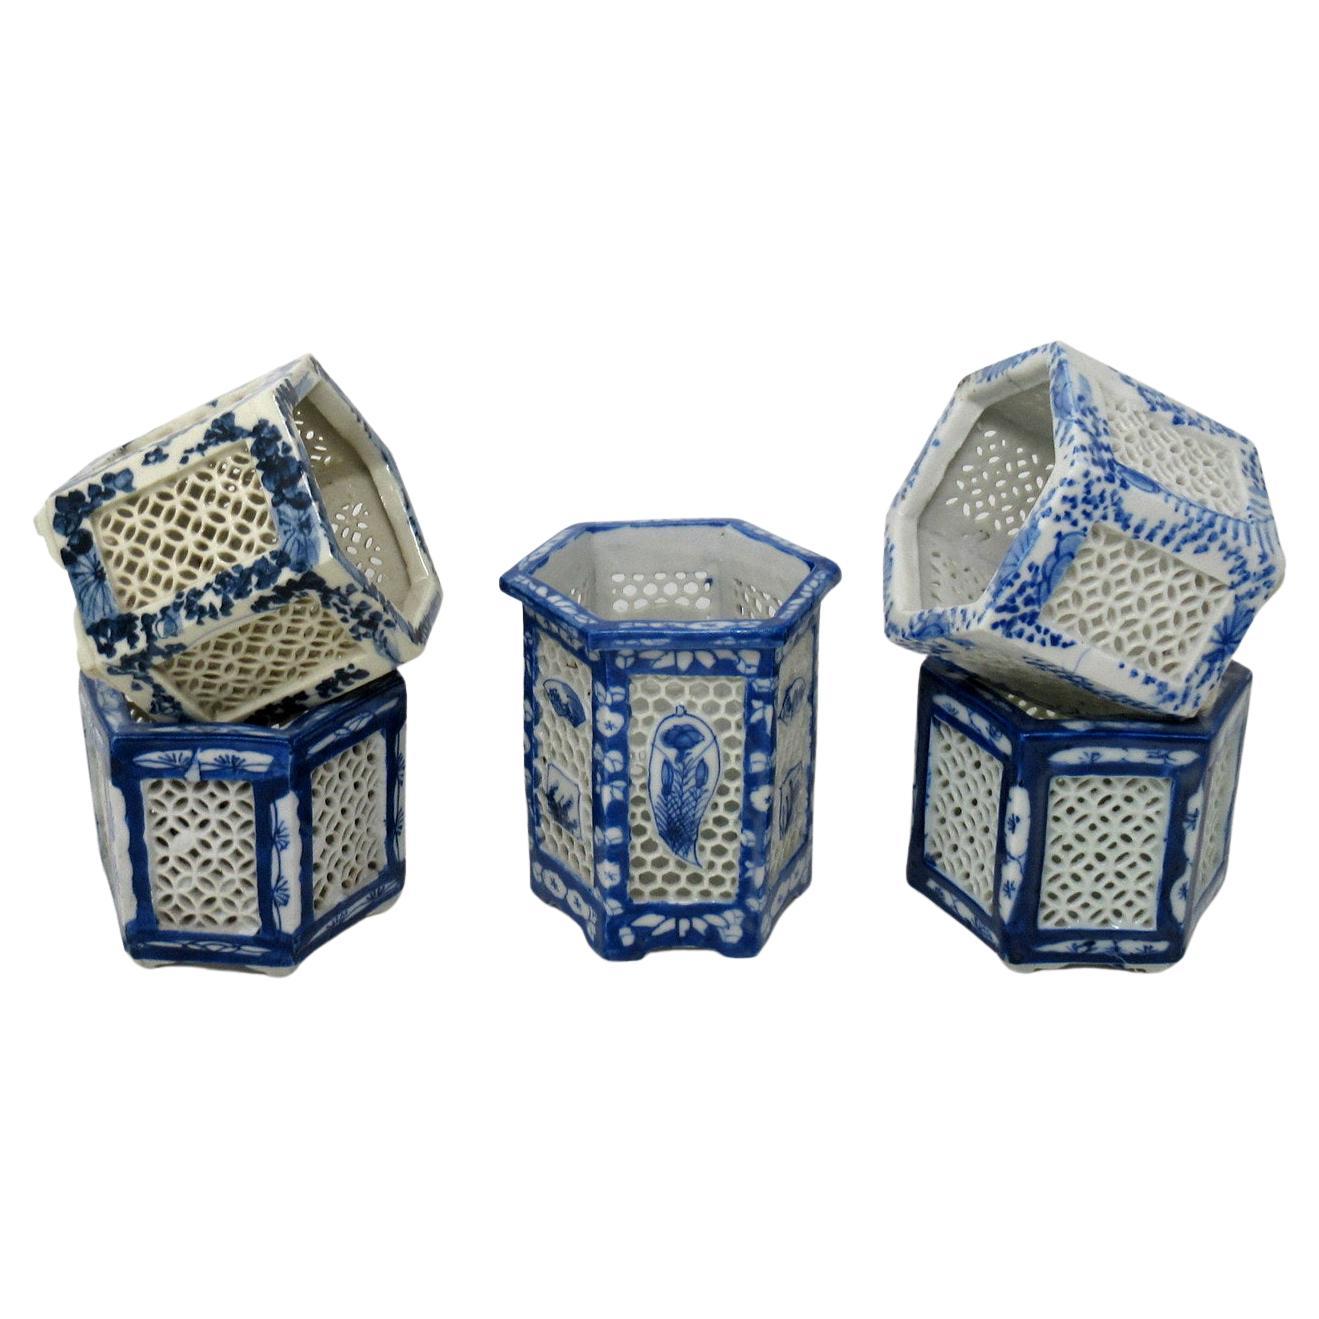 Hand Painted Blue White Japanese Chinese Reticulated Hexagonal Porcelain Vases